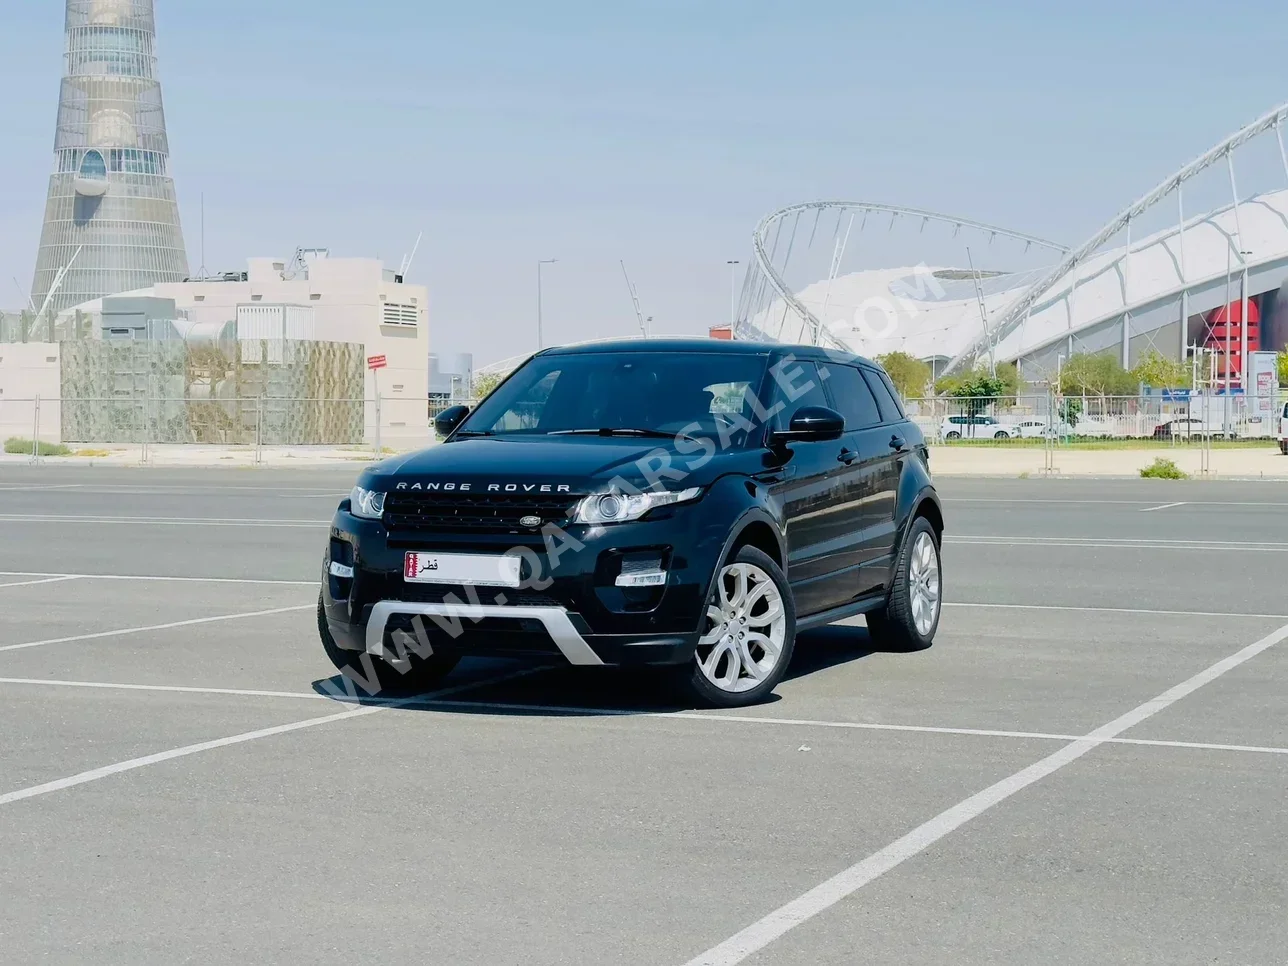 Land Rover  Evoque  Dynamic  2015  Automatic  85,000 Km  4 Cylinder  Four Wheel Drive (4WD)  SUV  Black